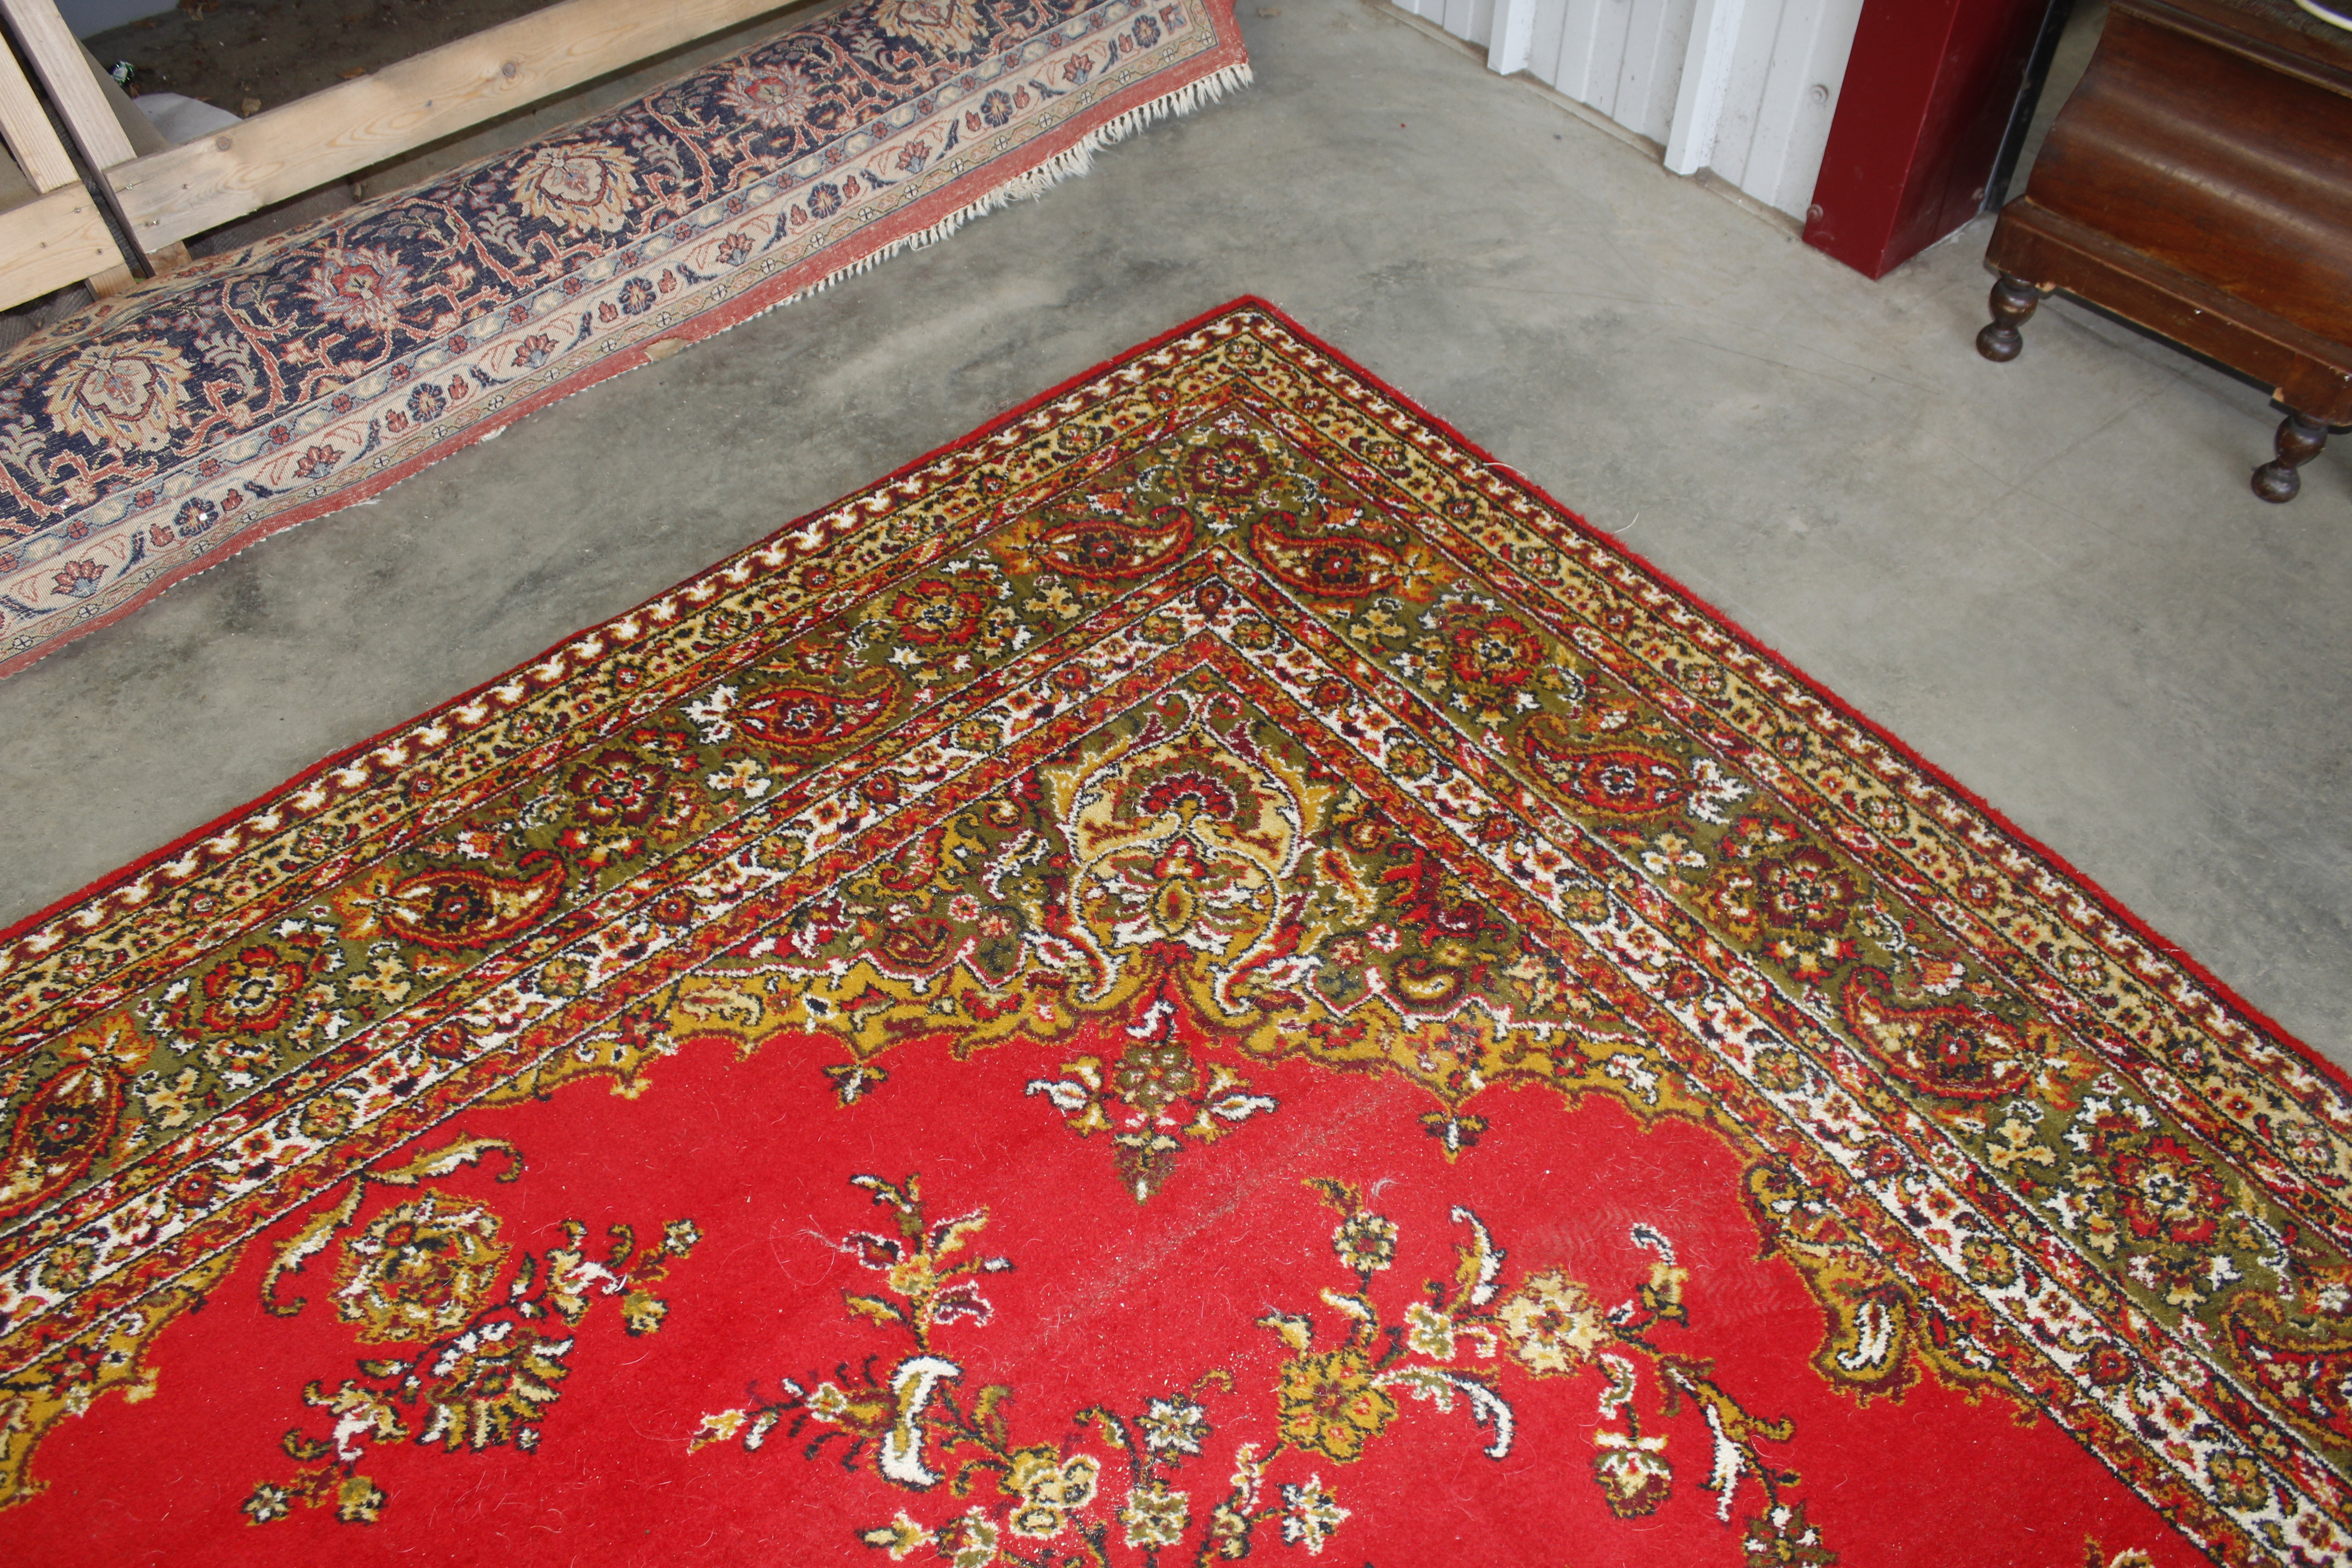 An approx. 12' x 9' red patterned rug AF - Image 5 of 11